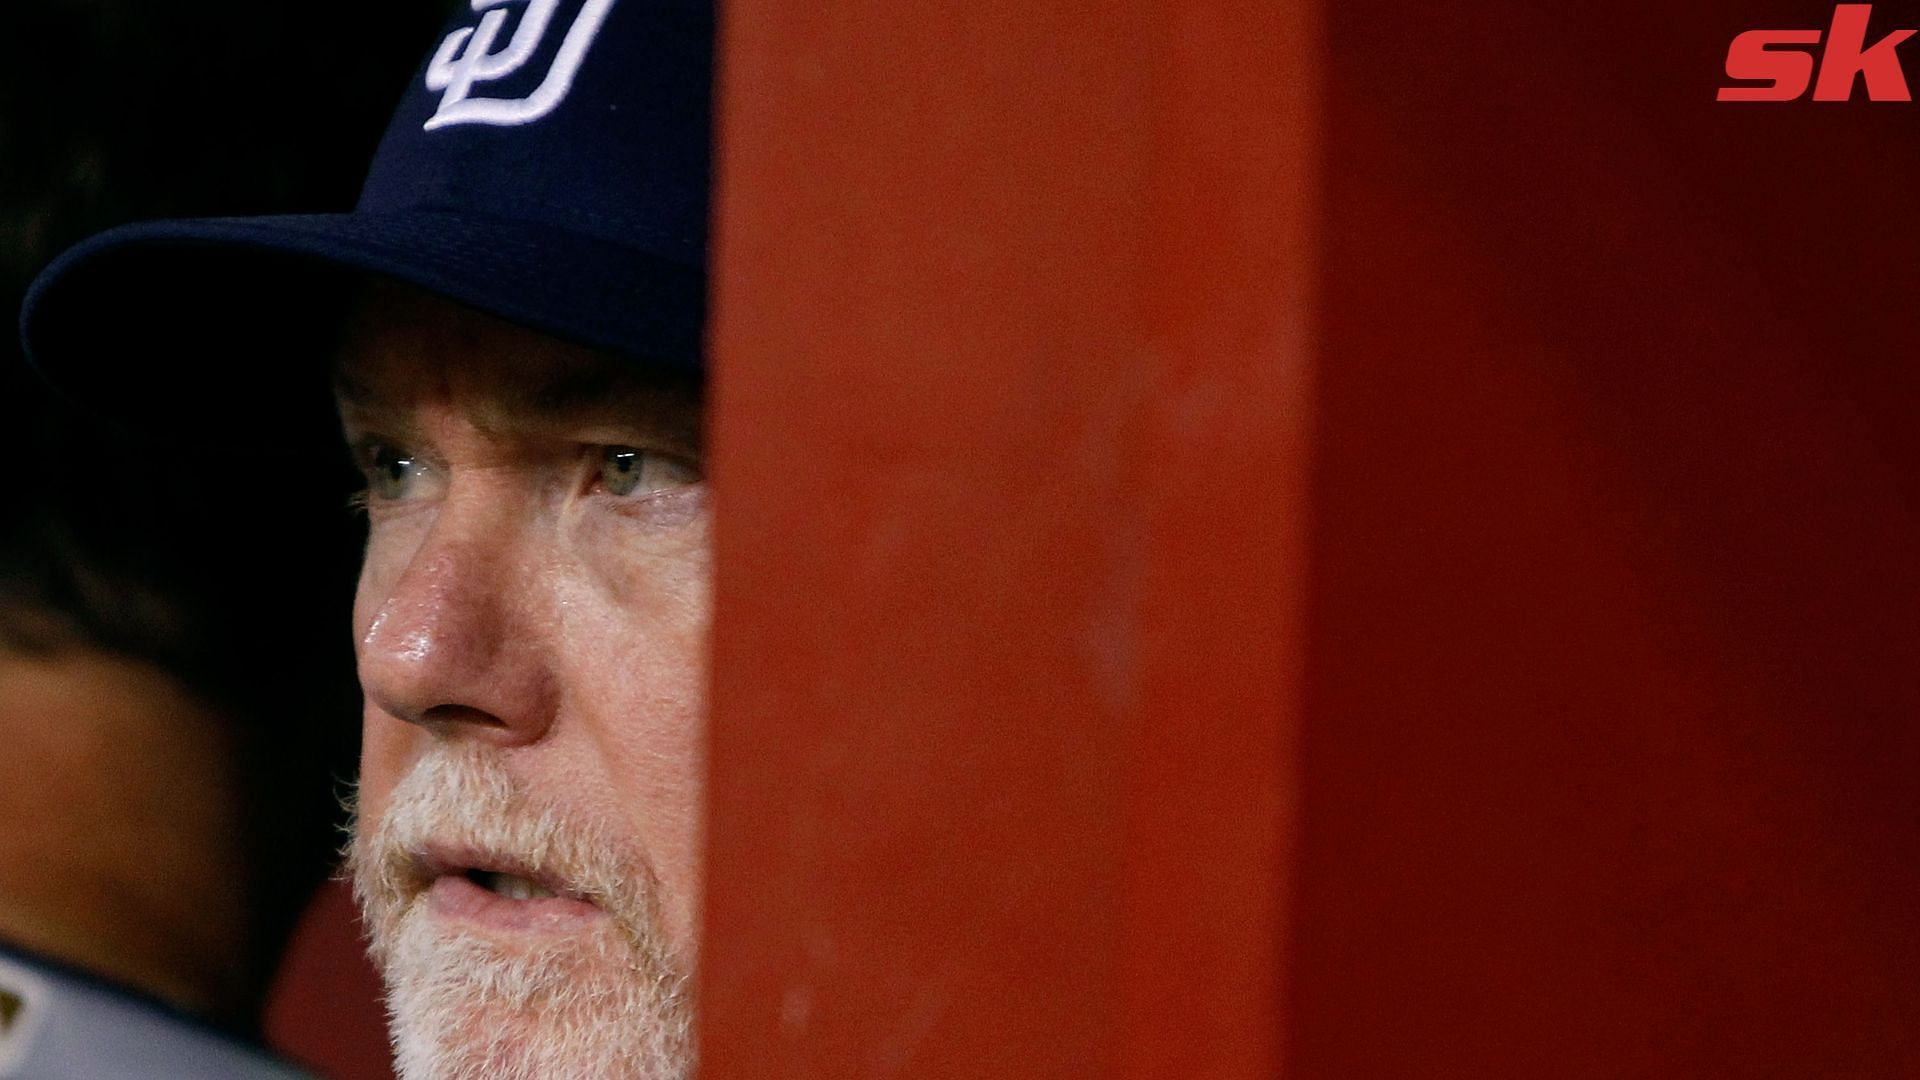 Mark McGwire was in tears when revealing his steroid usage during his days in the MLB